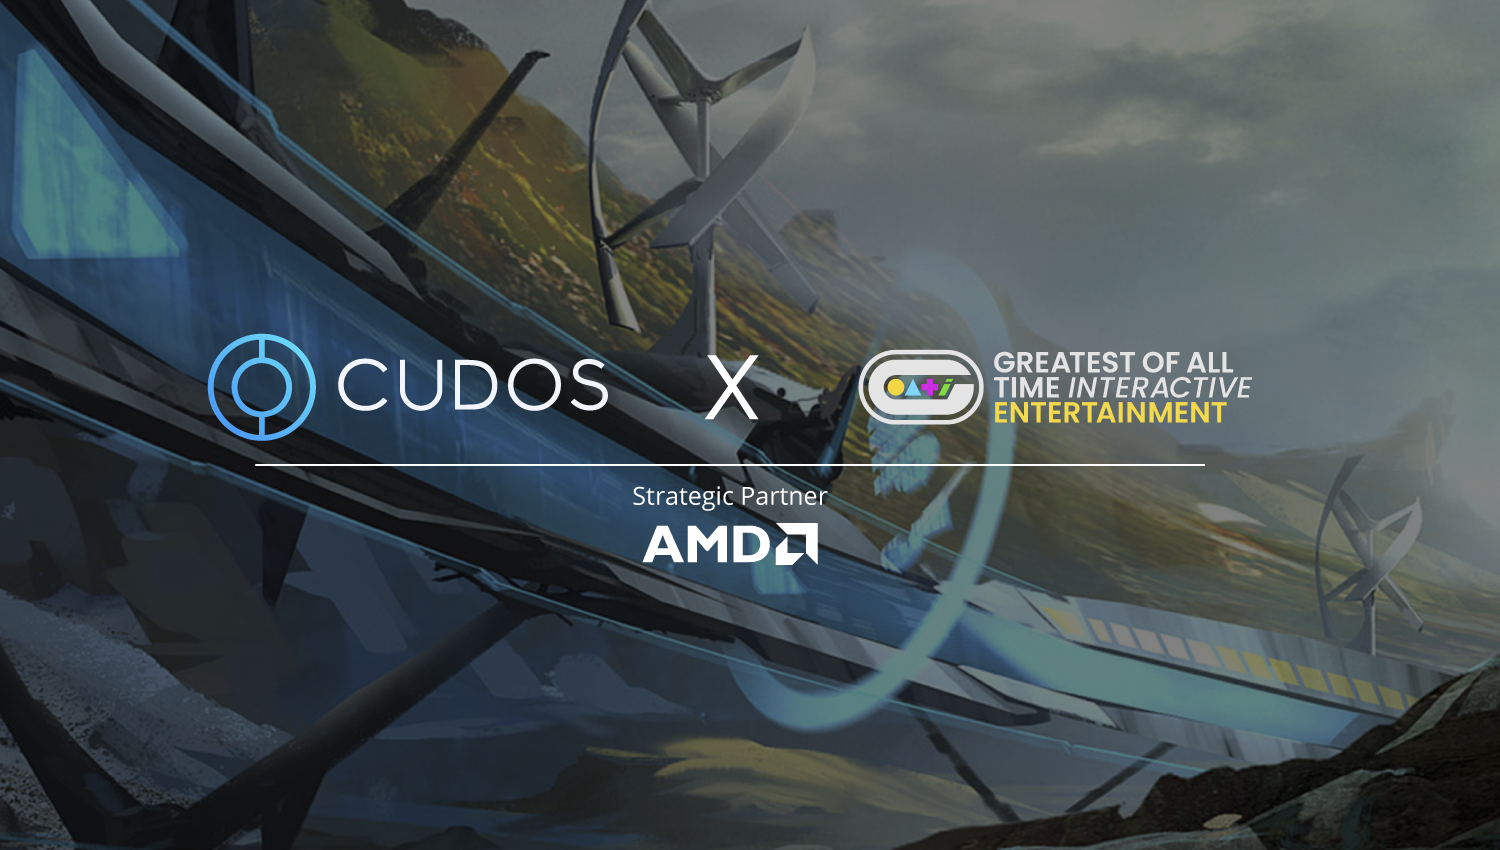 AMD, GOATi and Cudos partner to create the ultimate gaming experience